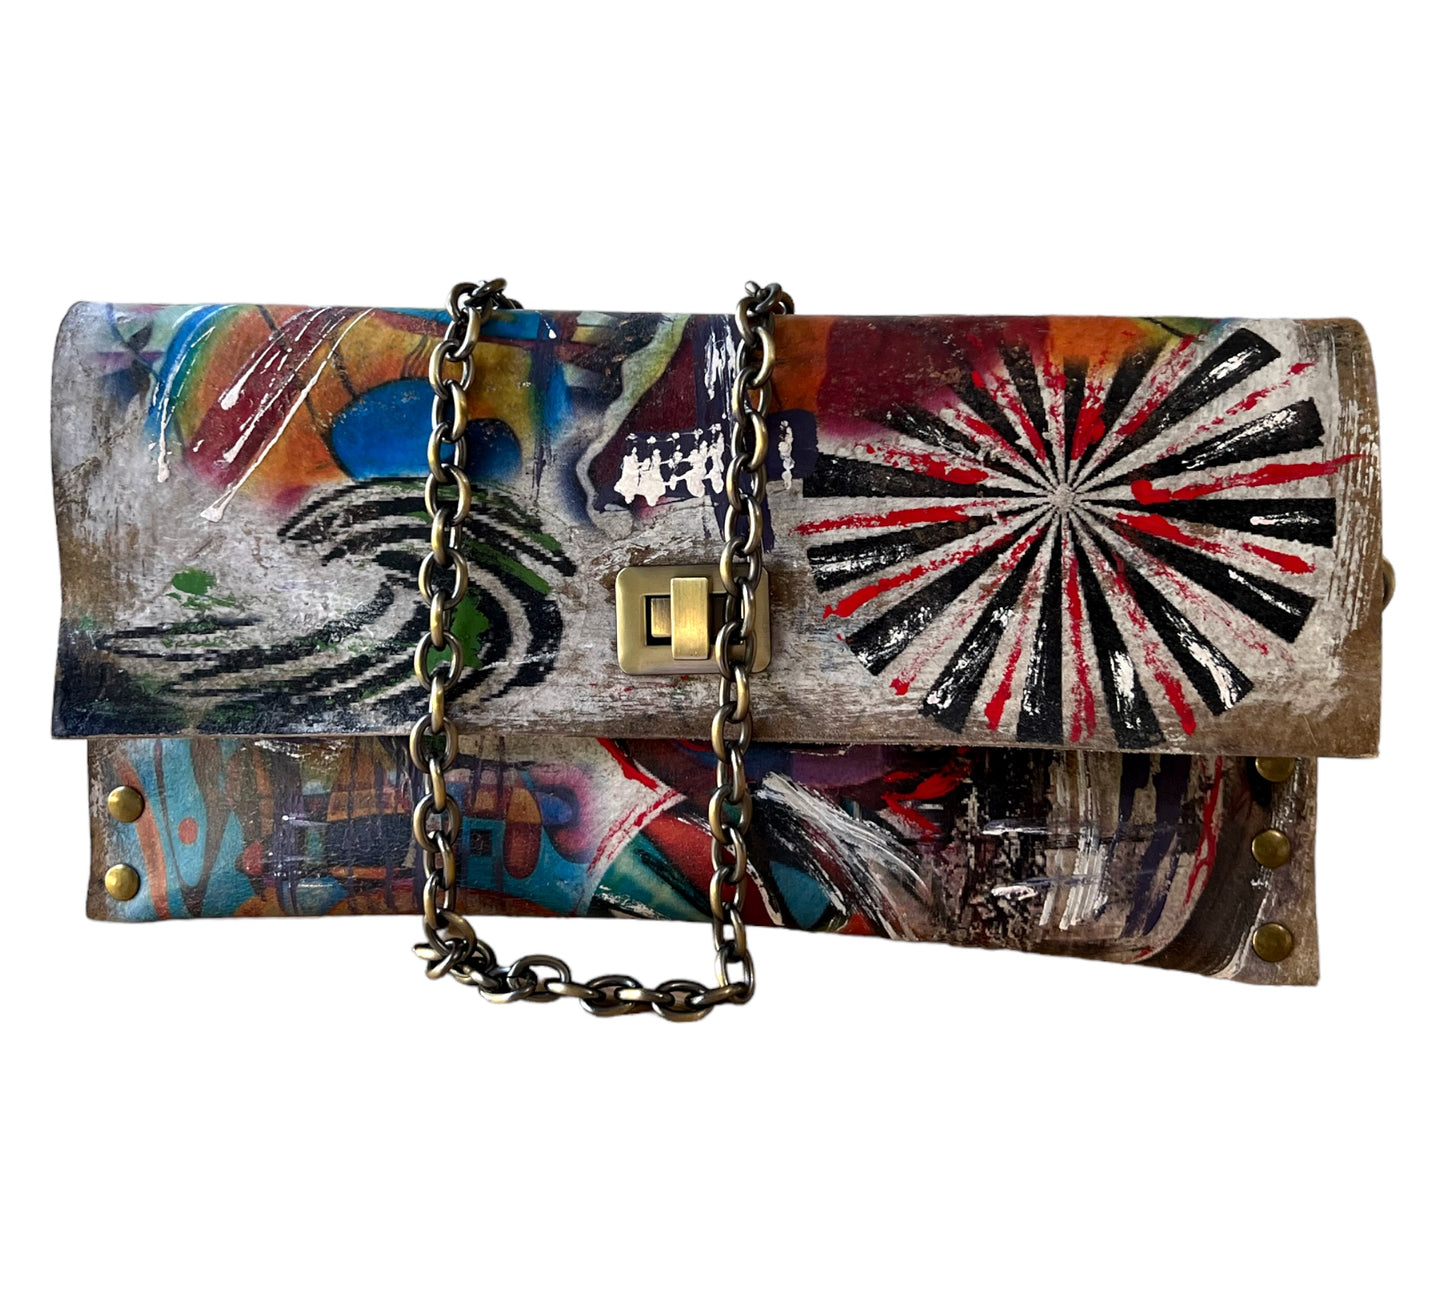 Abstract Leather Hand-Painted Clutch Bag